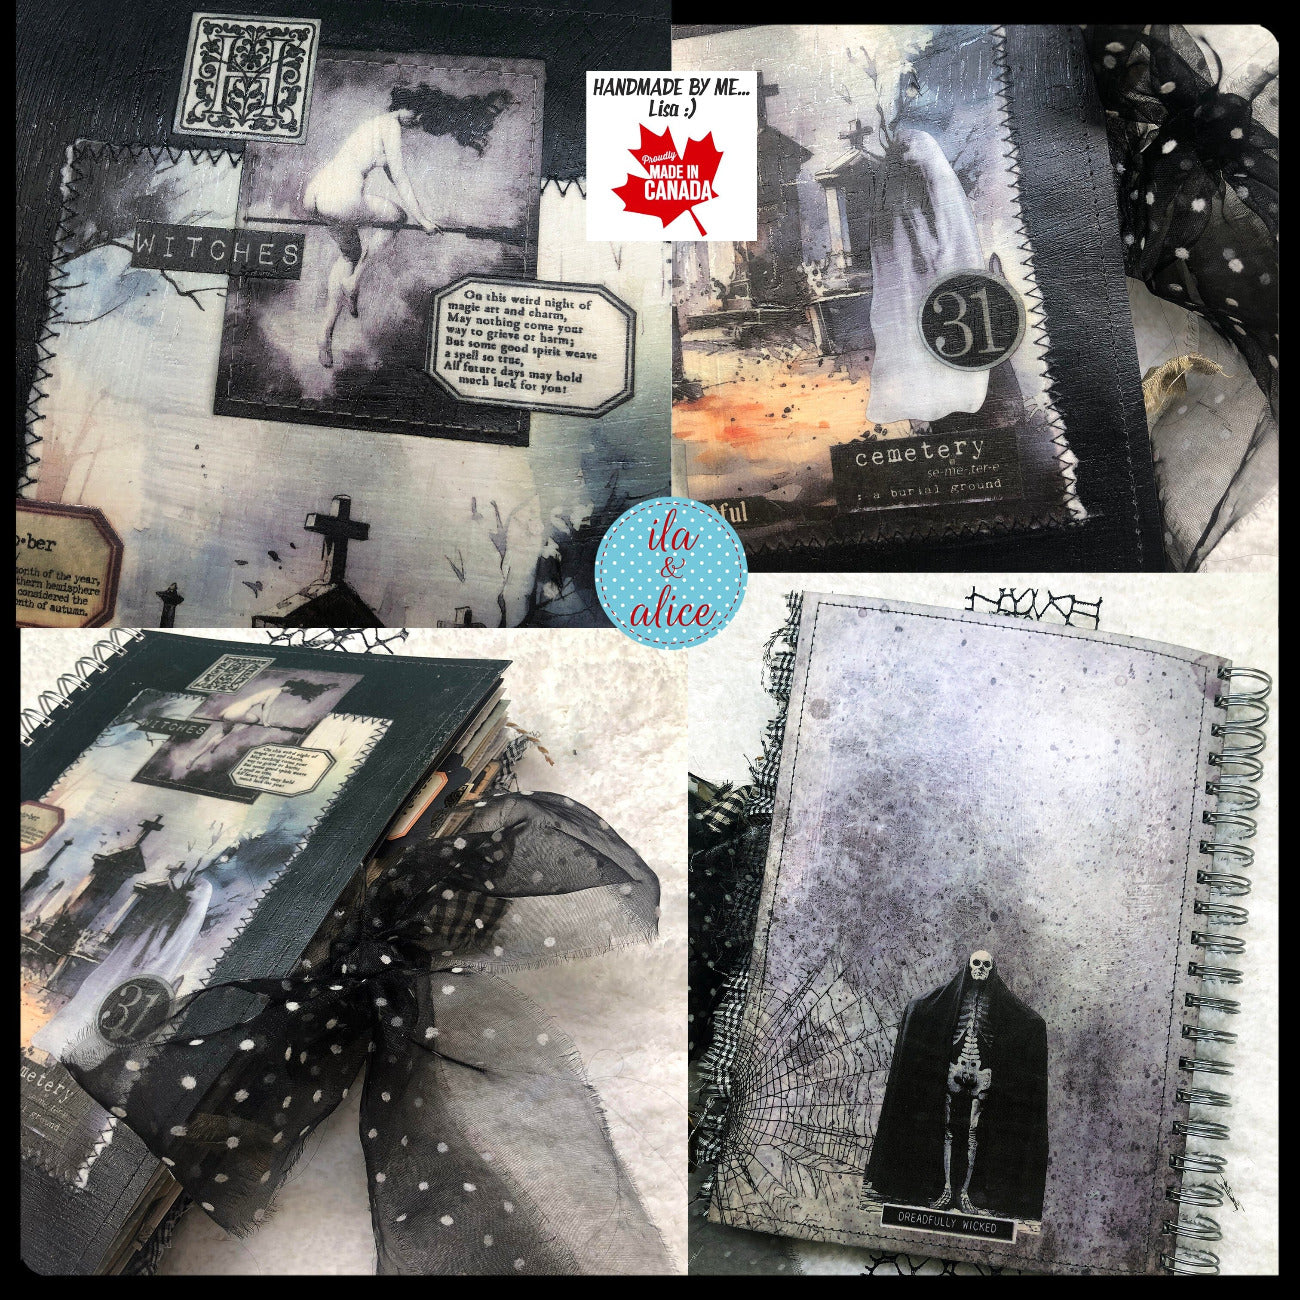 Haunted Souls Halloween Junk Journal with Ghosts & Ghouls Journal ila & alice 